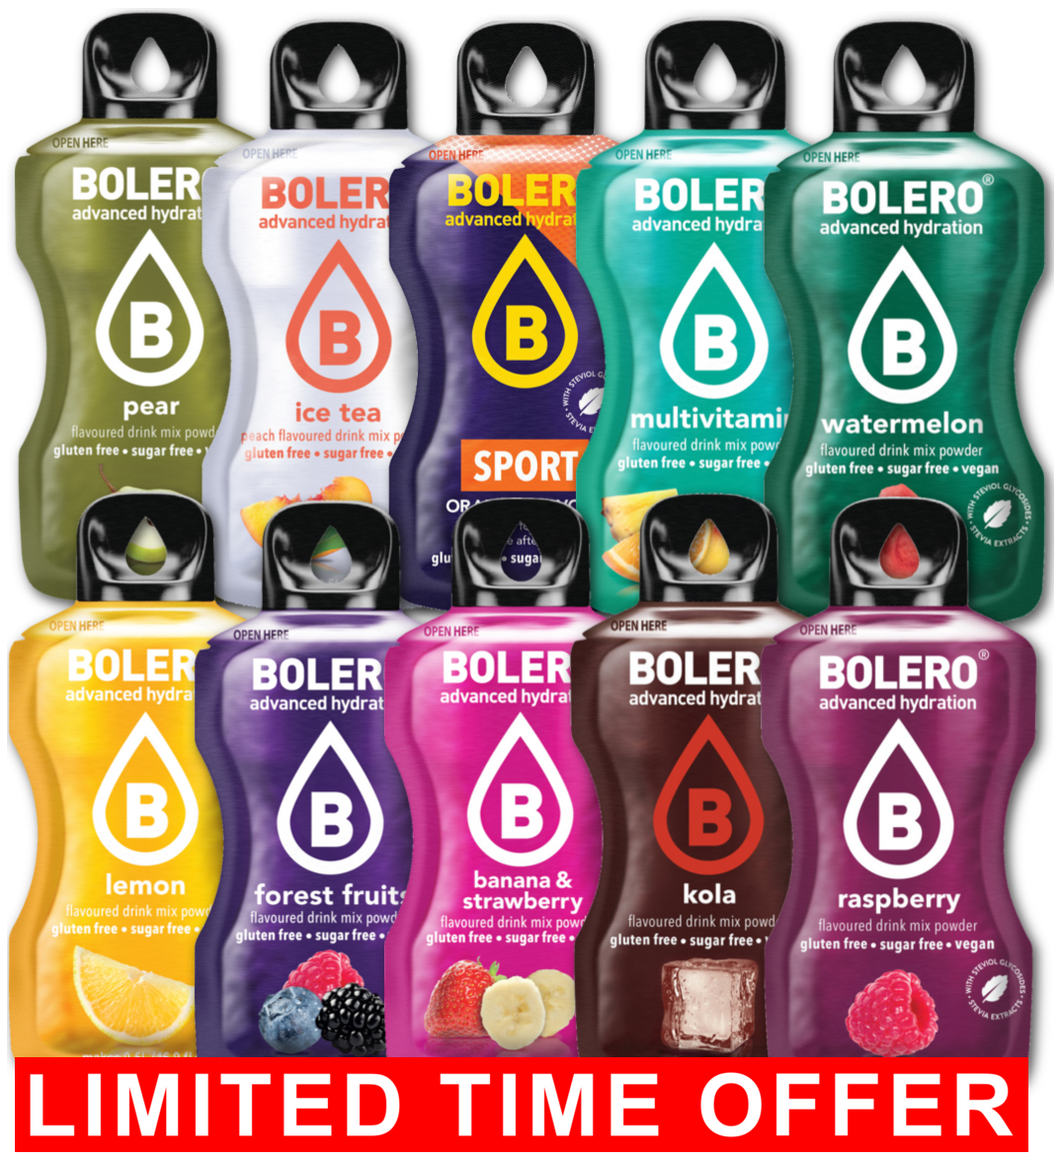 Bolero Advanced Hydration-SALE Mix Bundle of 35 Small Sachet Flavors LIMITED TIME OFFER